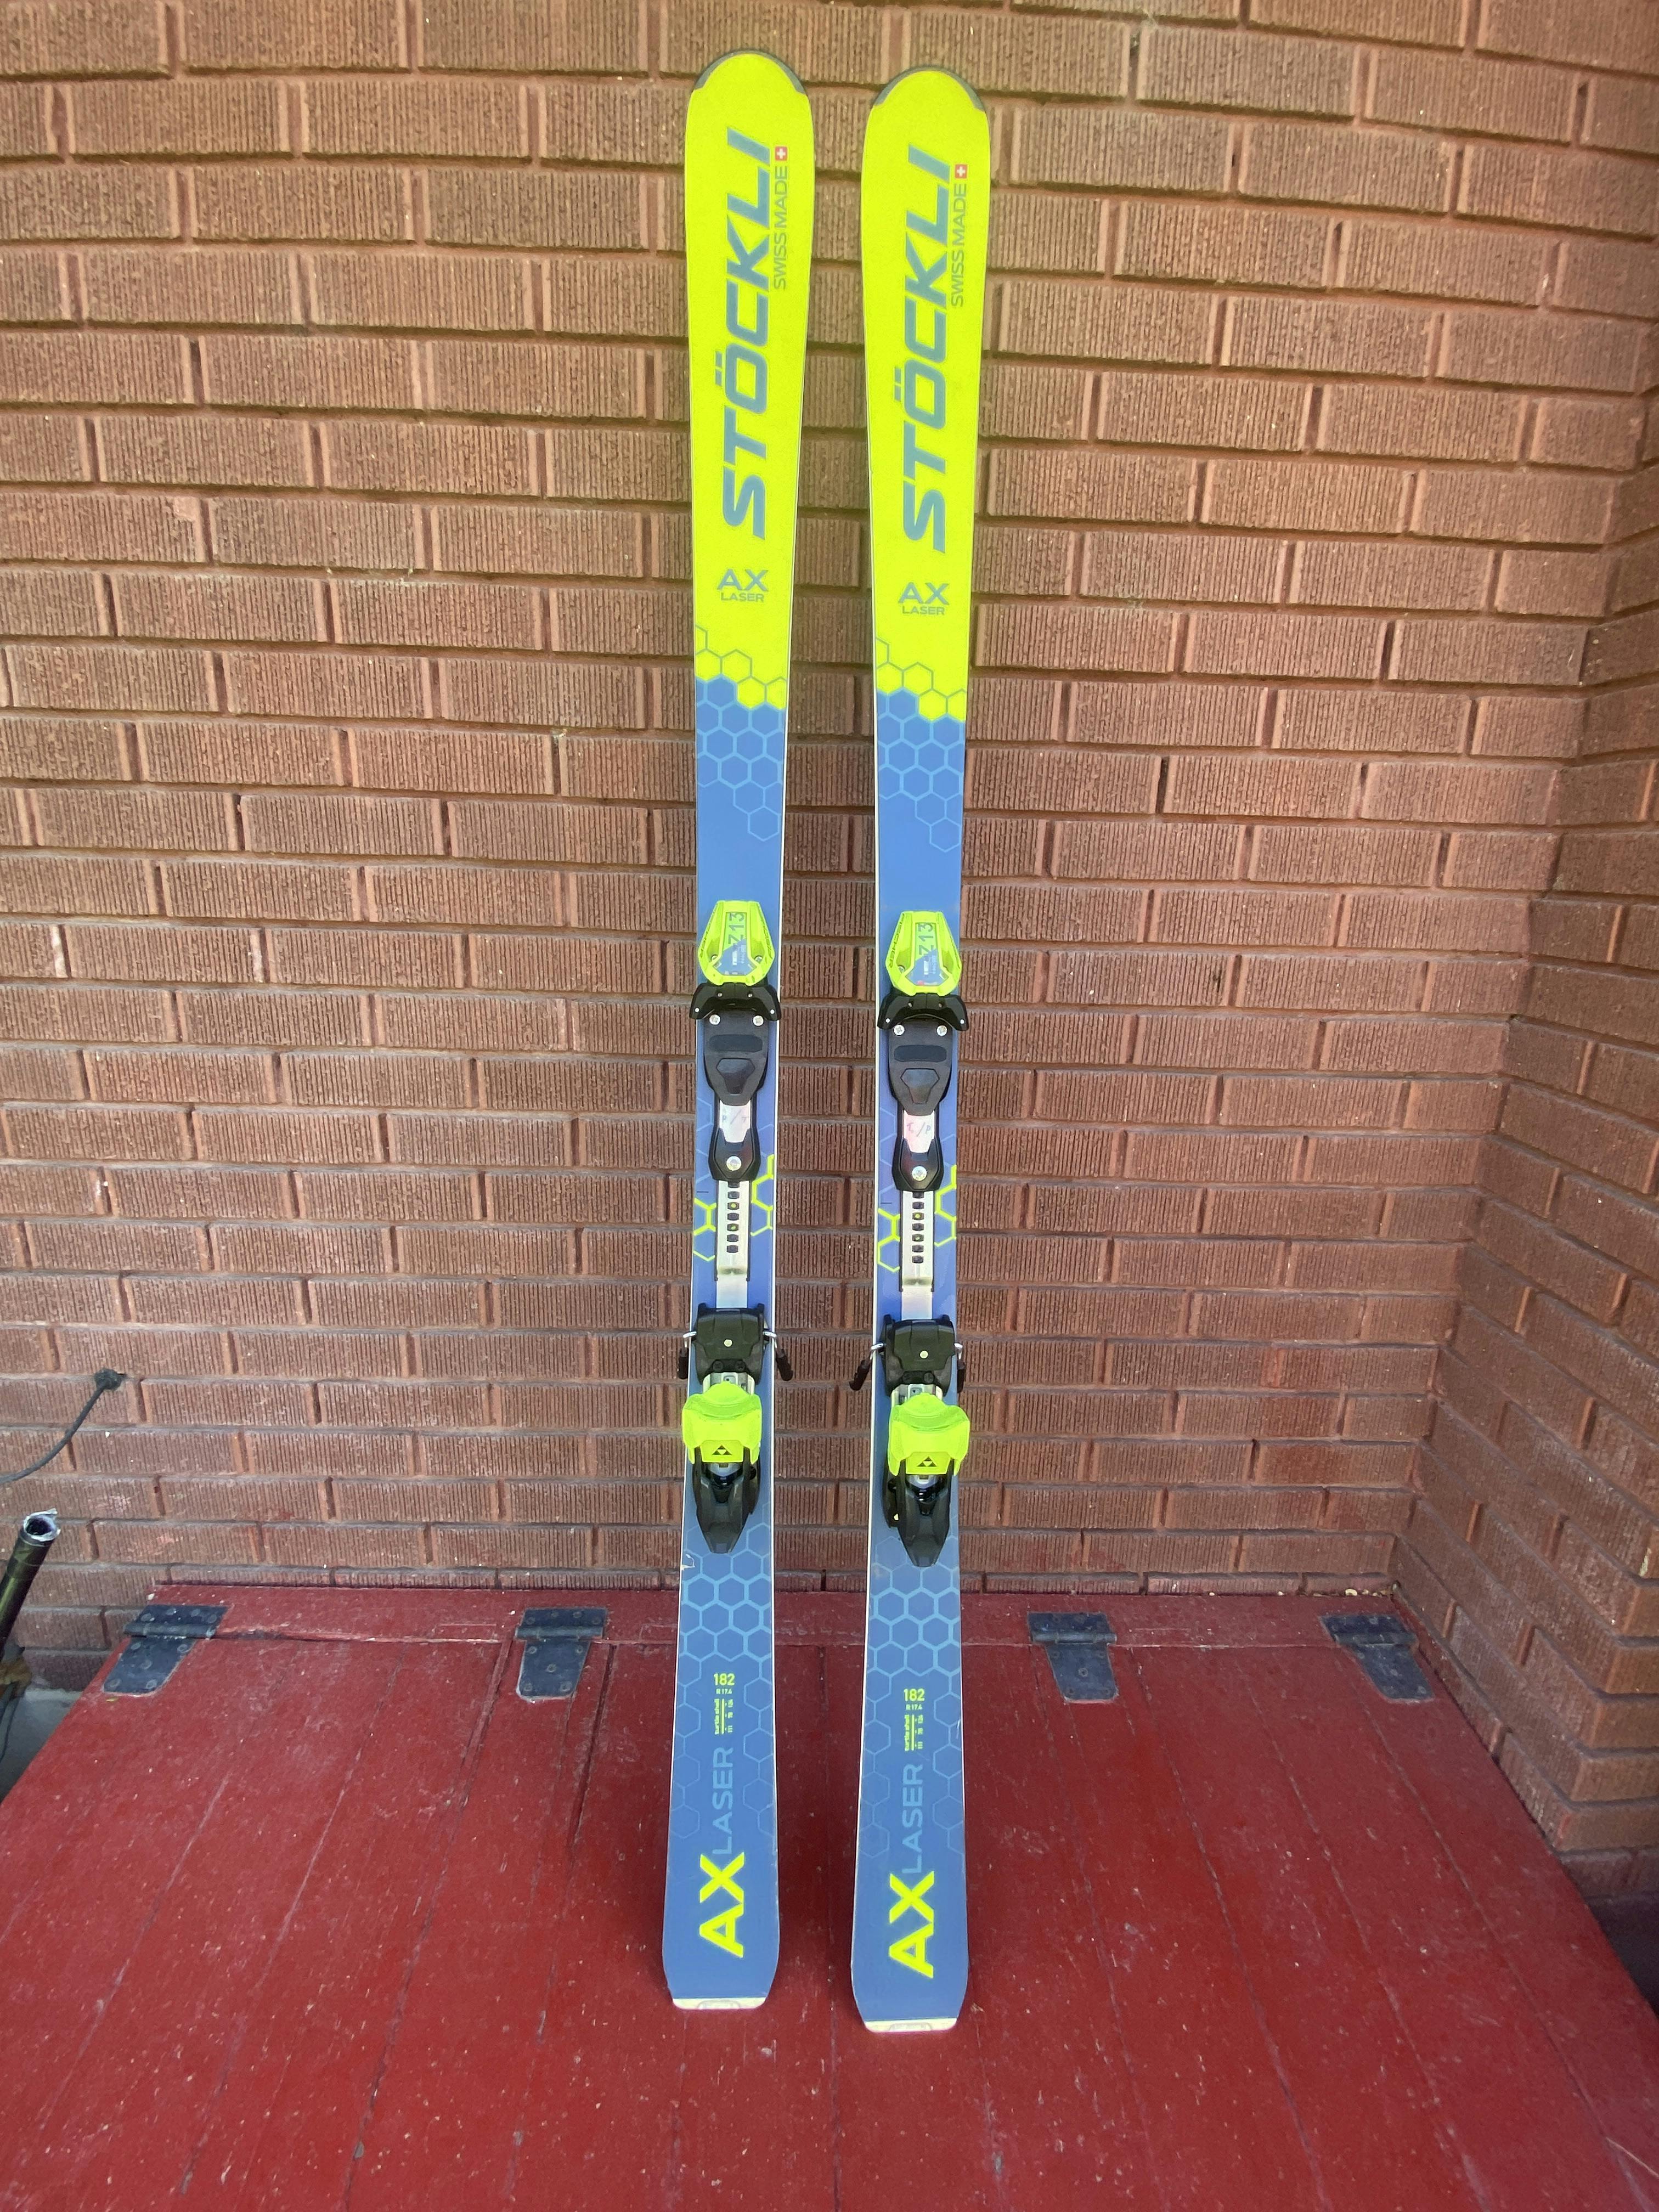 The Stockli Stockli Laser AX Skis W Dxm 13 Bindings standing next to each other. 